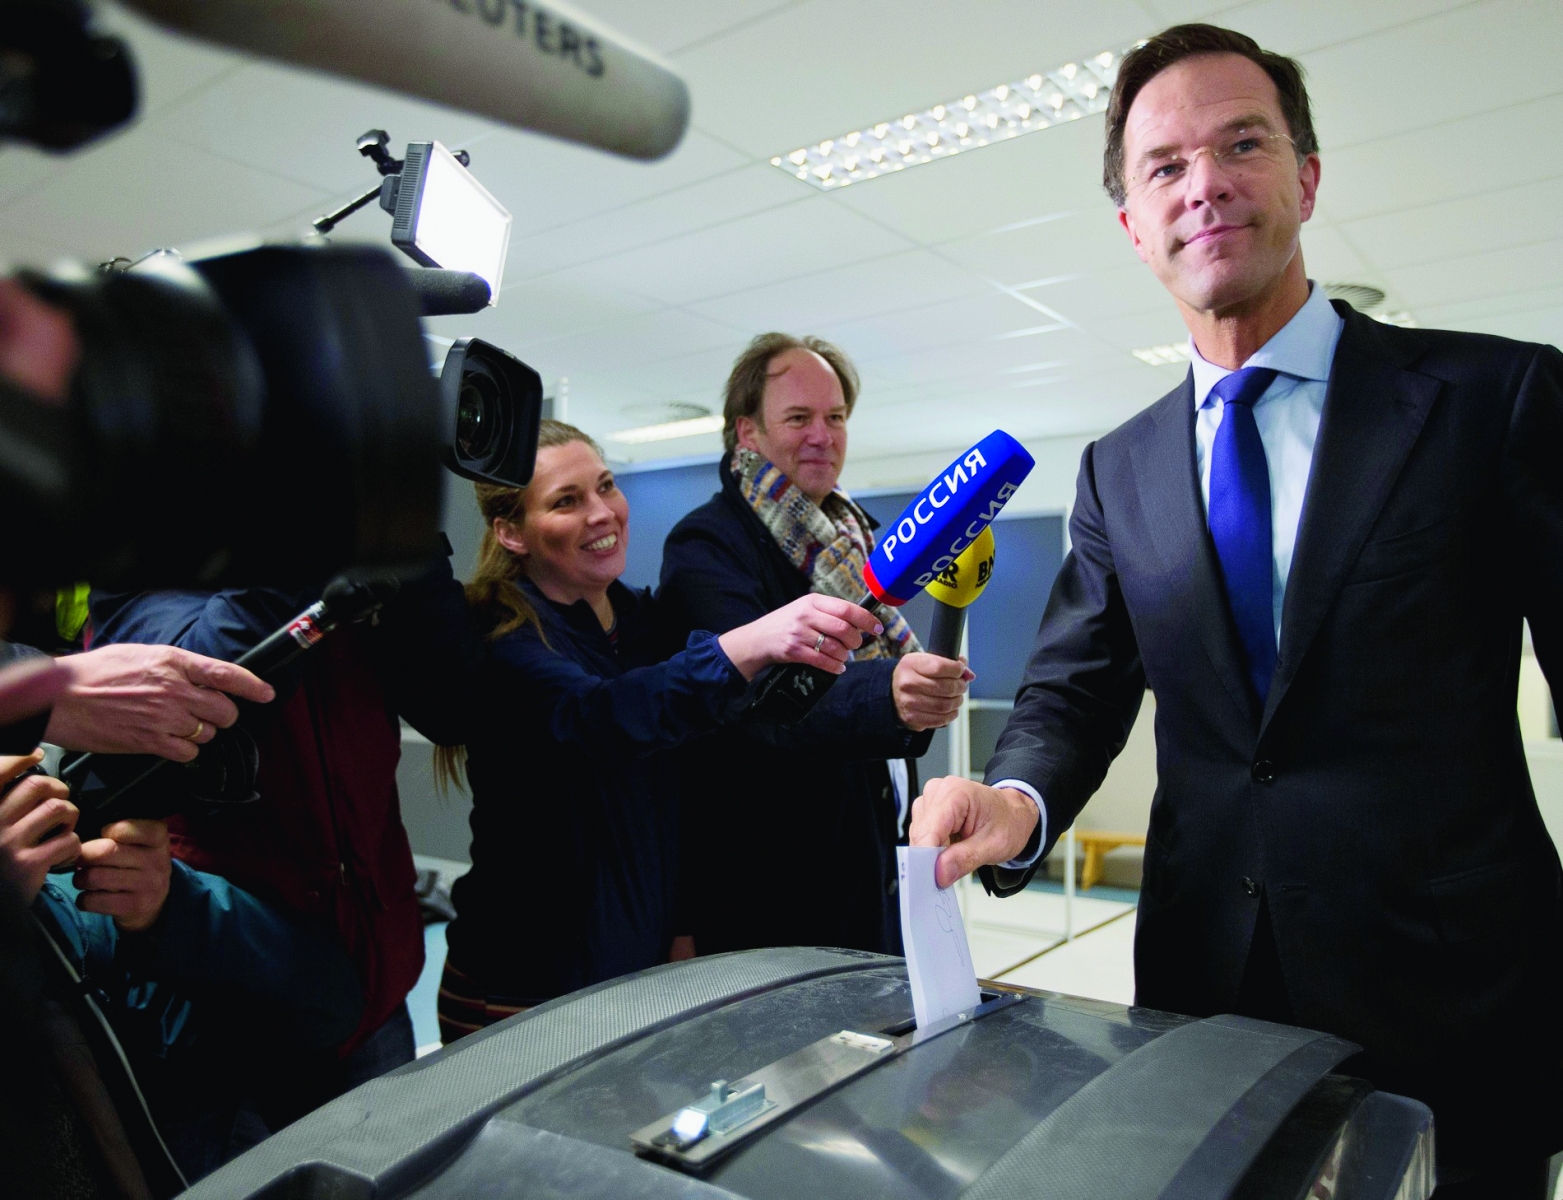 Dutch Prime Minister Mark Rutte casts his vote in a non-binding referendum on the EU-Ukraine association agreement in The Hague, Netherlands, Wednesday, April 6, 2016. The vote is seen by opponents of the 28-nation EU bloc as an opportunity to express their anger at what they consider unwanted expansionism and a lack of democratic rights for EU citizens, three months before British citizens decide in their own referendum whether to leave the EU altogether. (AP Photo/Peter Dejong) Netherlands EU Ukraine Referendum